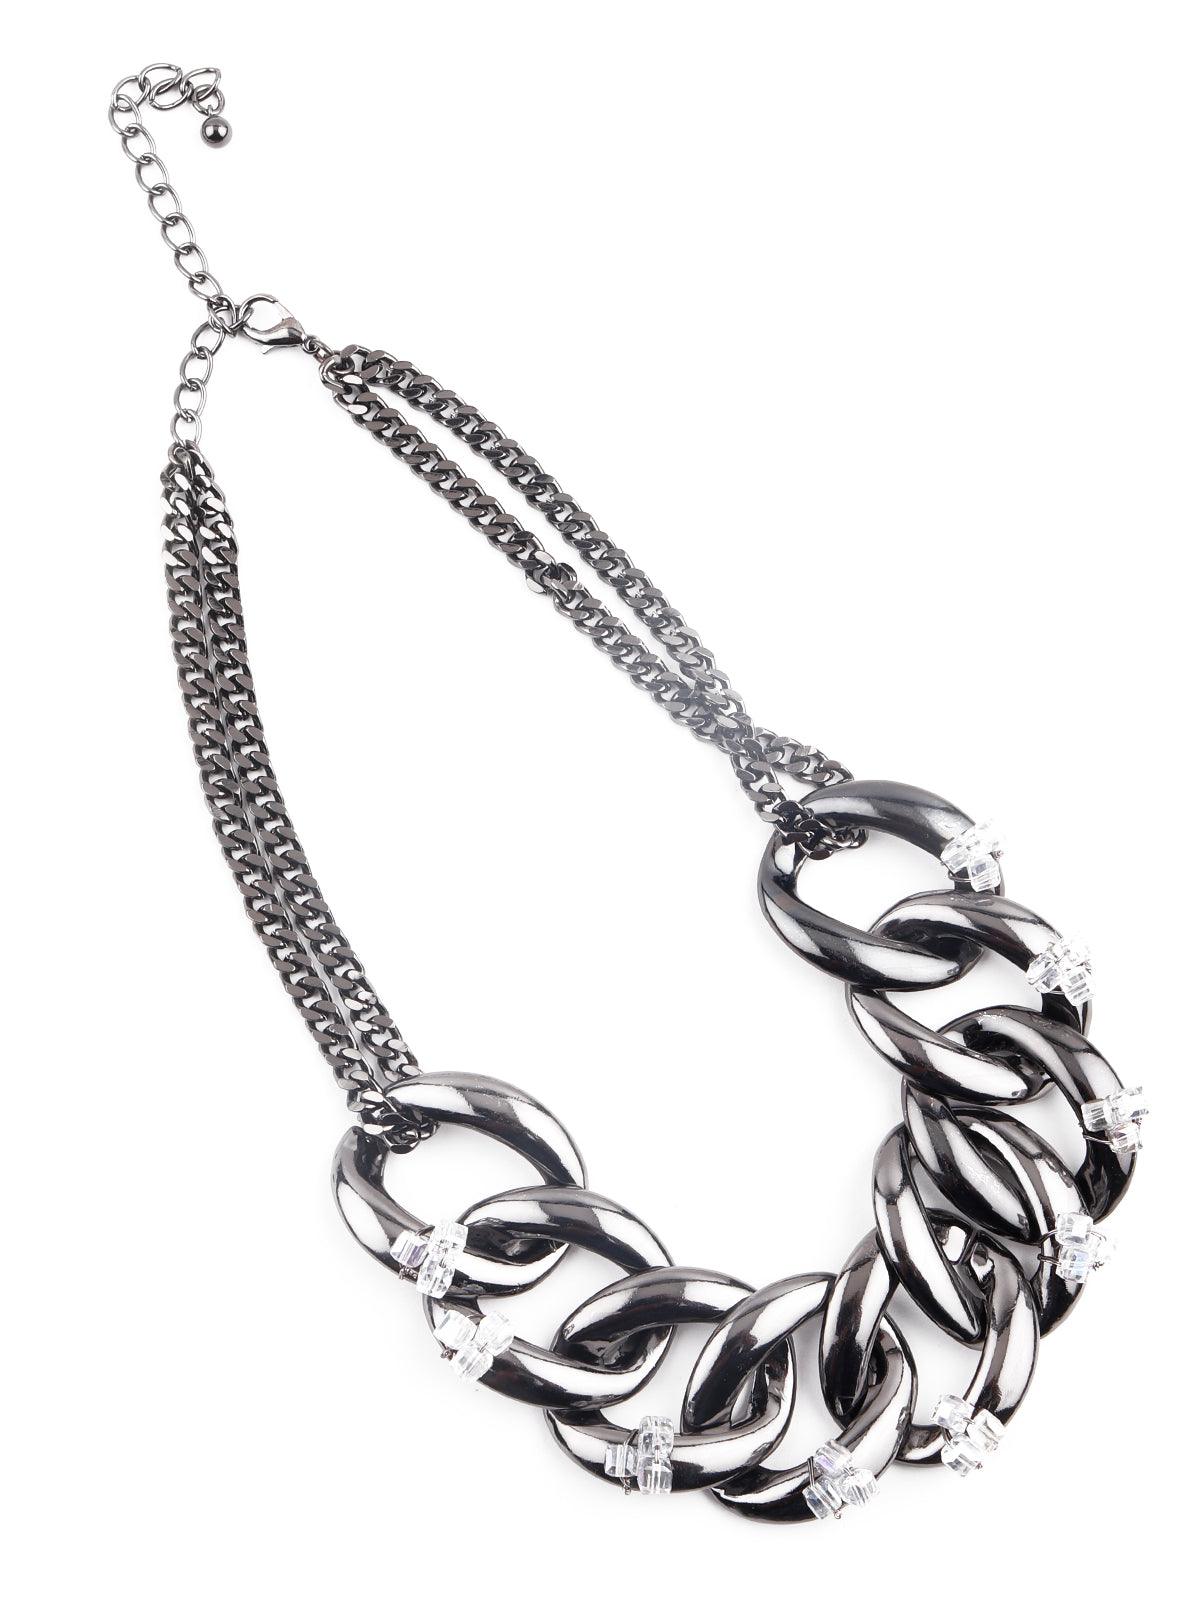 Women's Chunky Silver Tone Chain Necklace Set For Women - Odette